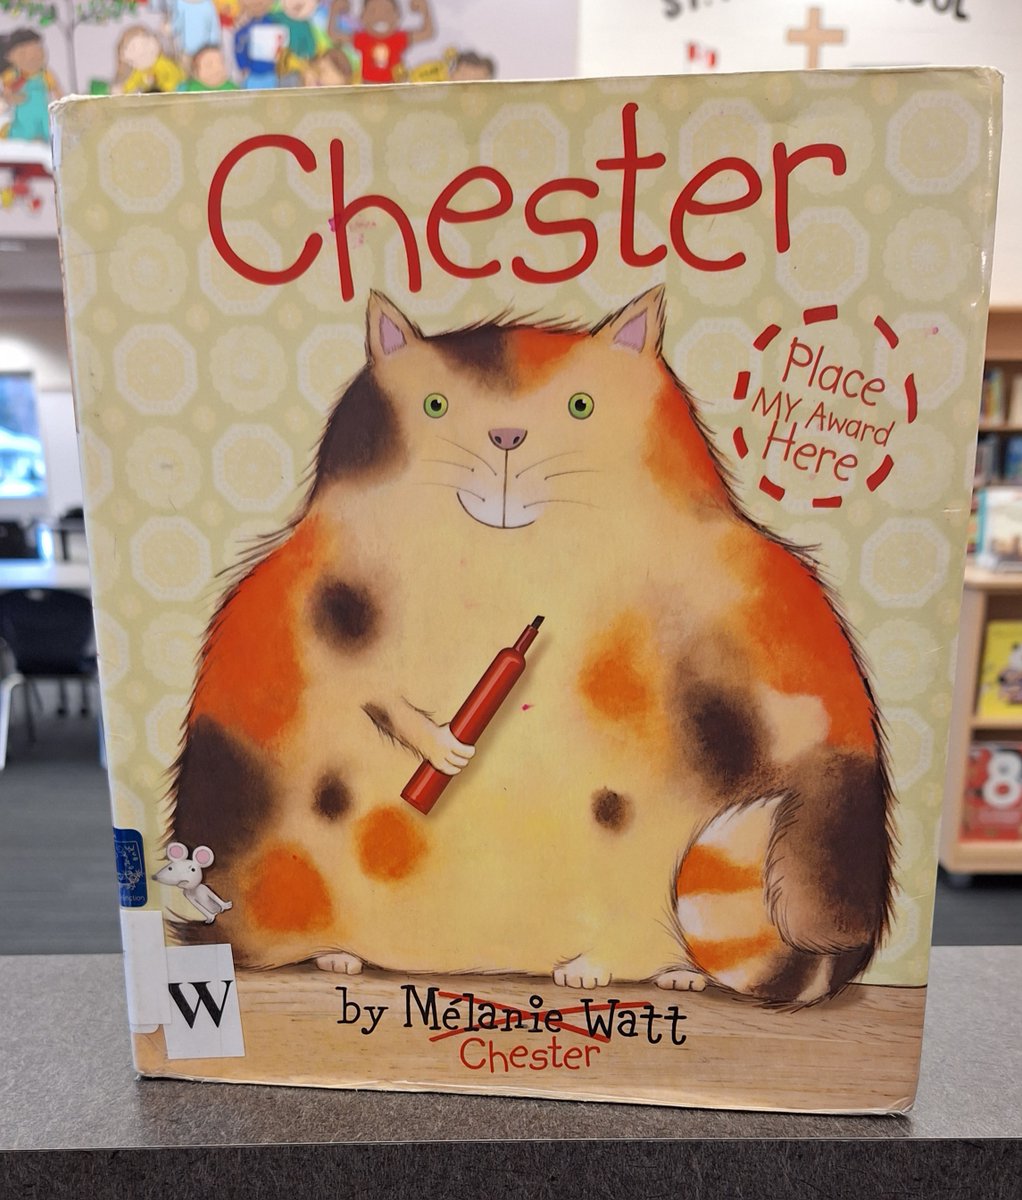 In honour of I Read Canadian Day today, this week's fun story is a Canadian classic - Chester by Mélanie Watt #IReadCanadianDay